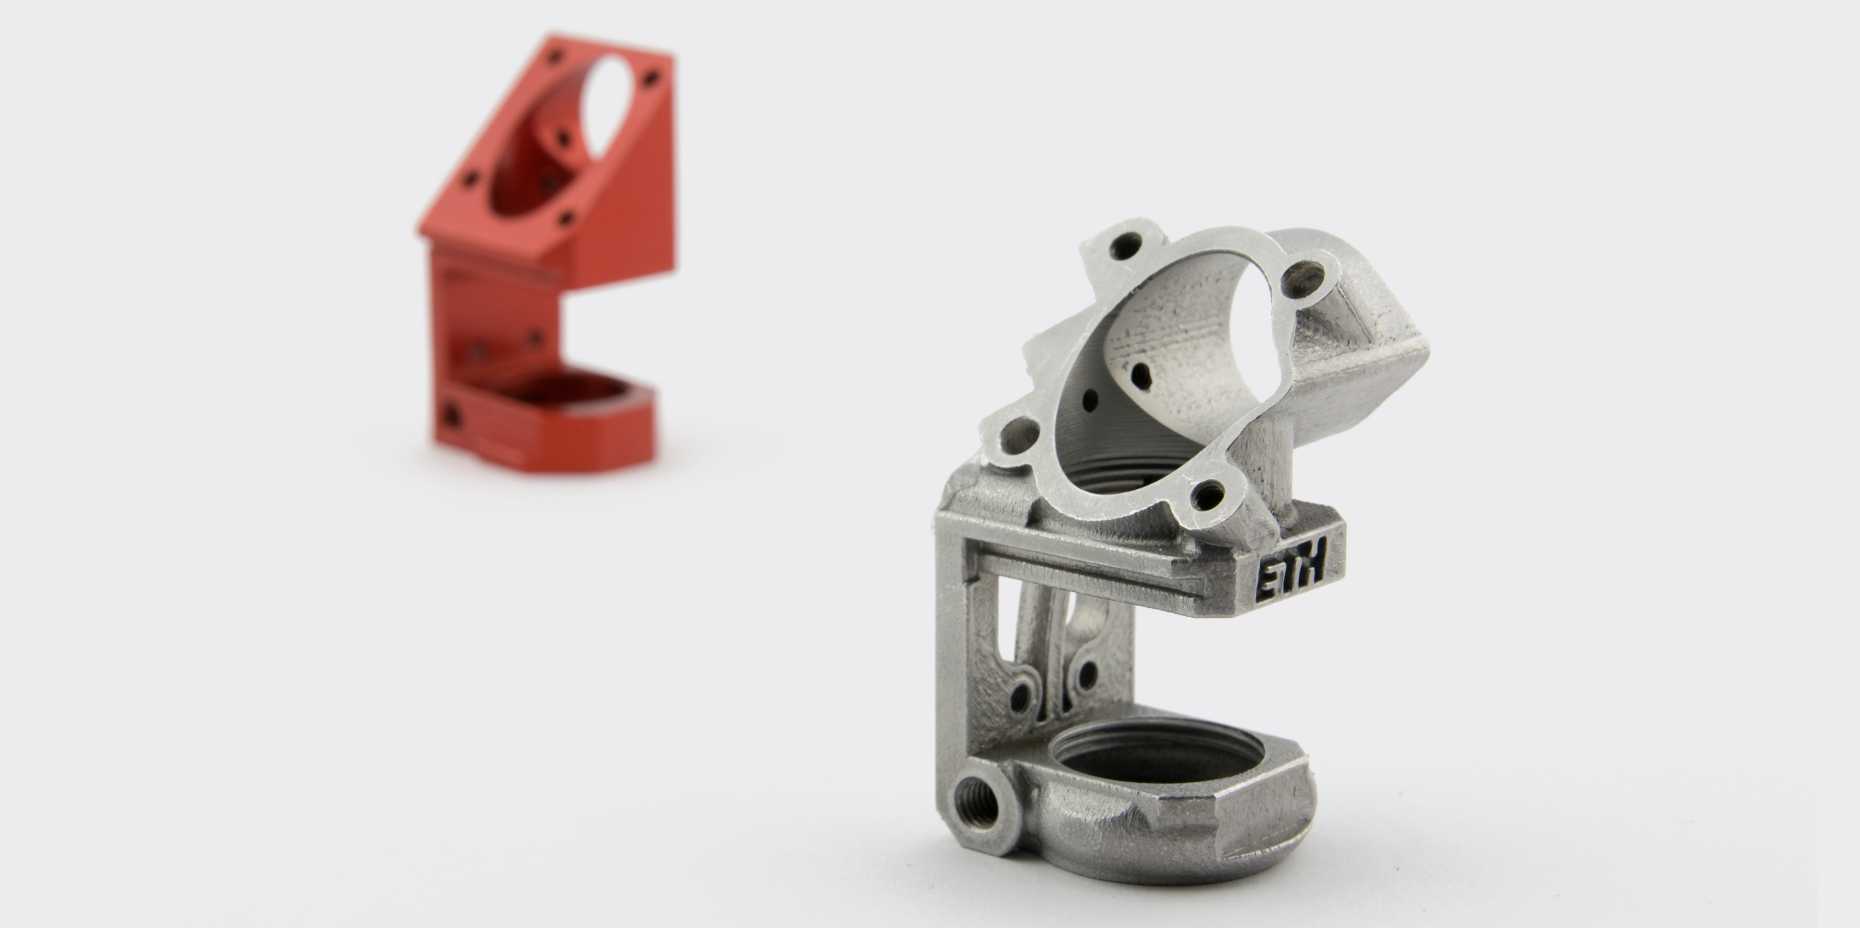 Enlarged view: Component specifically engineered for 3D printing. (Photo: PDZ Product Development Group Zurich)